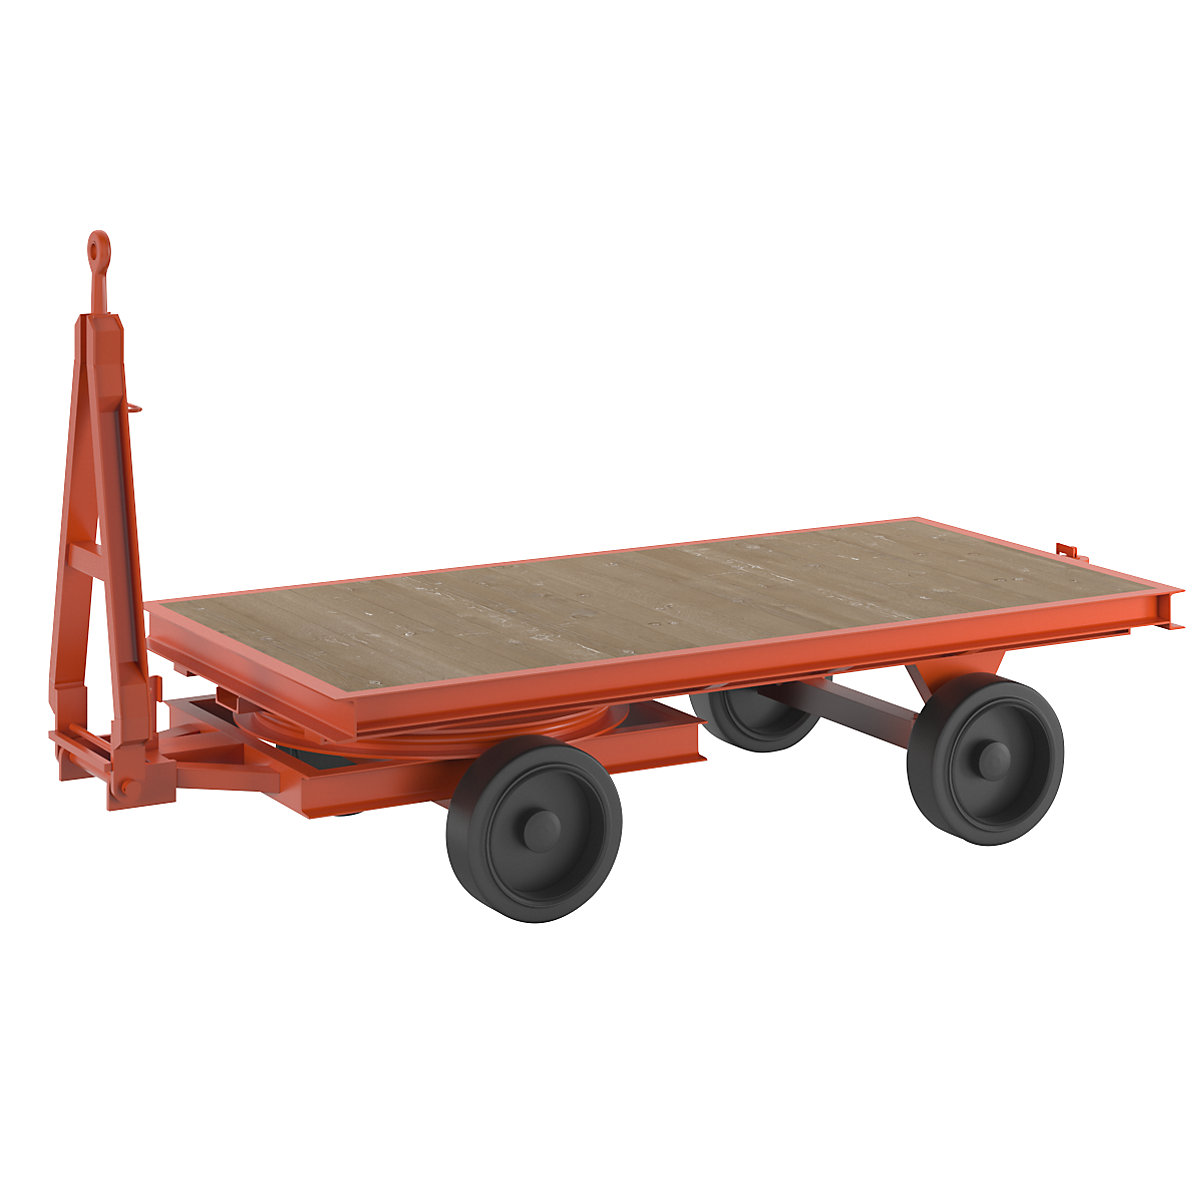 Trailer, 2-wheel turntable steering, max. load 8 t, platform 2.5 x 1.25 m, solid rubber tyres-14